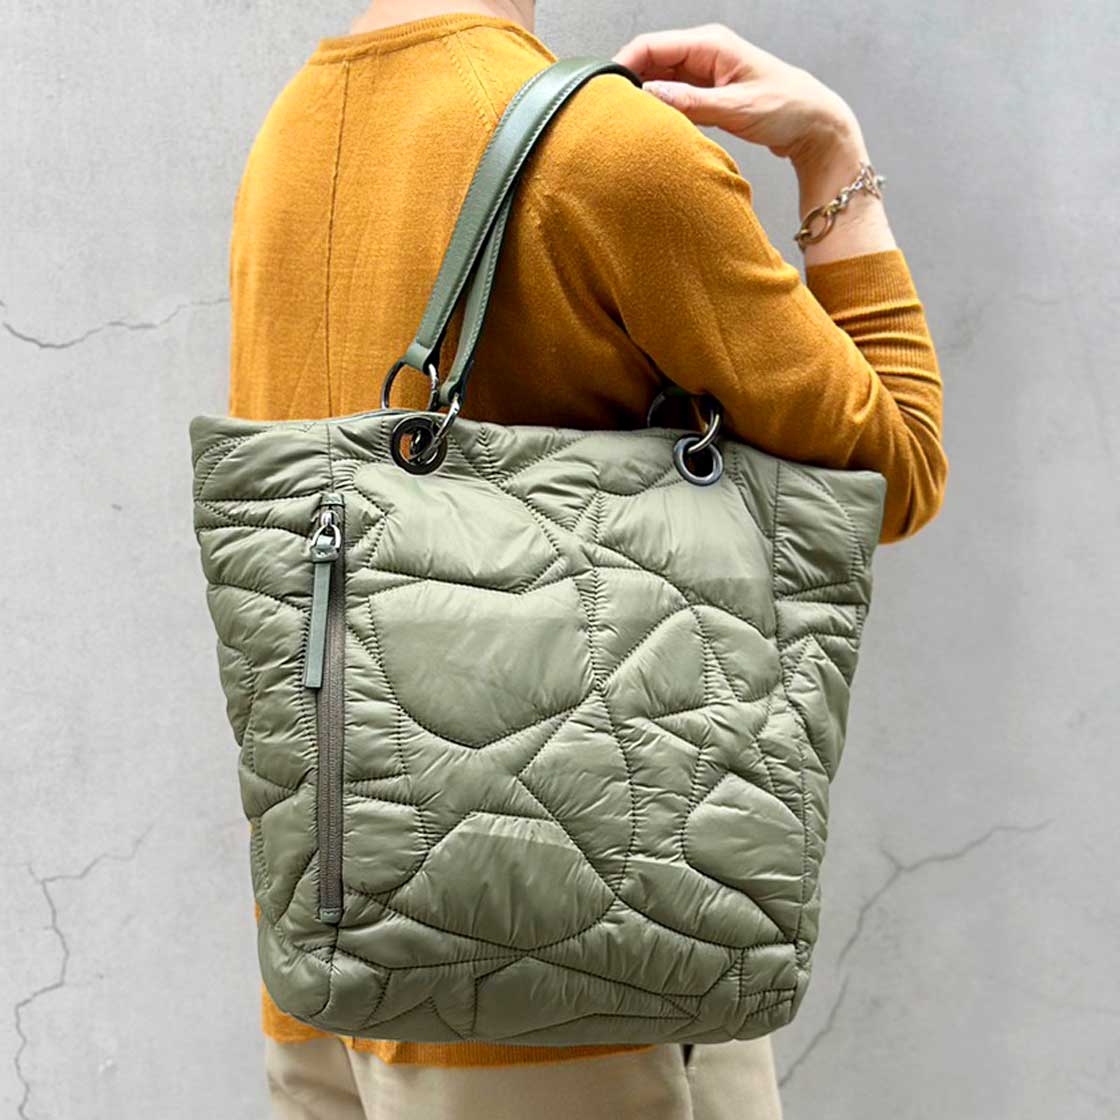 【QUILTED TOTE】ナイロントートバッグ